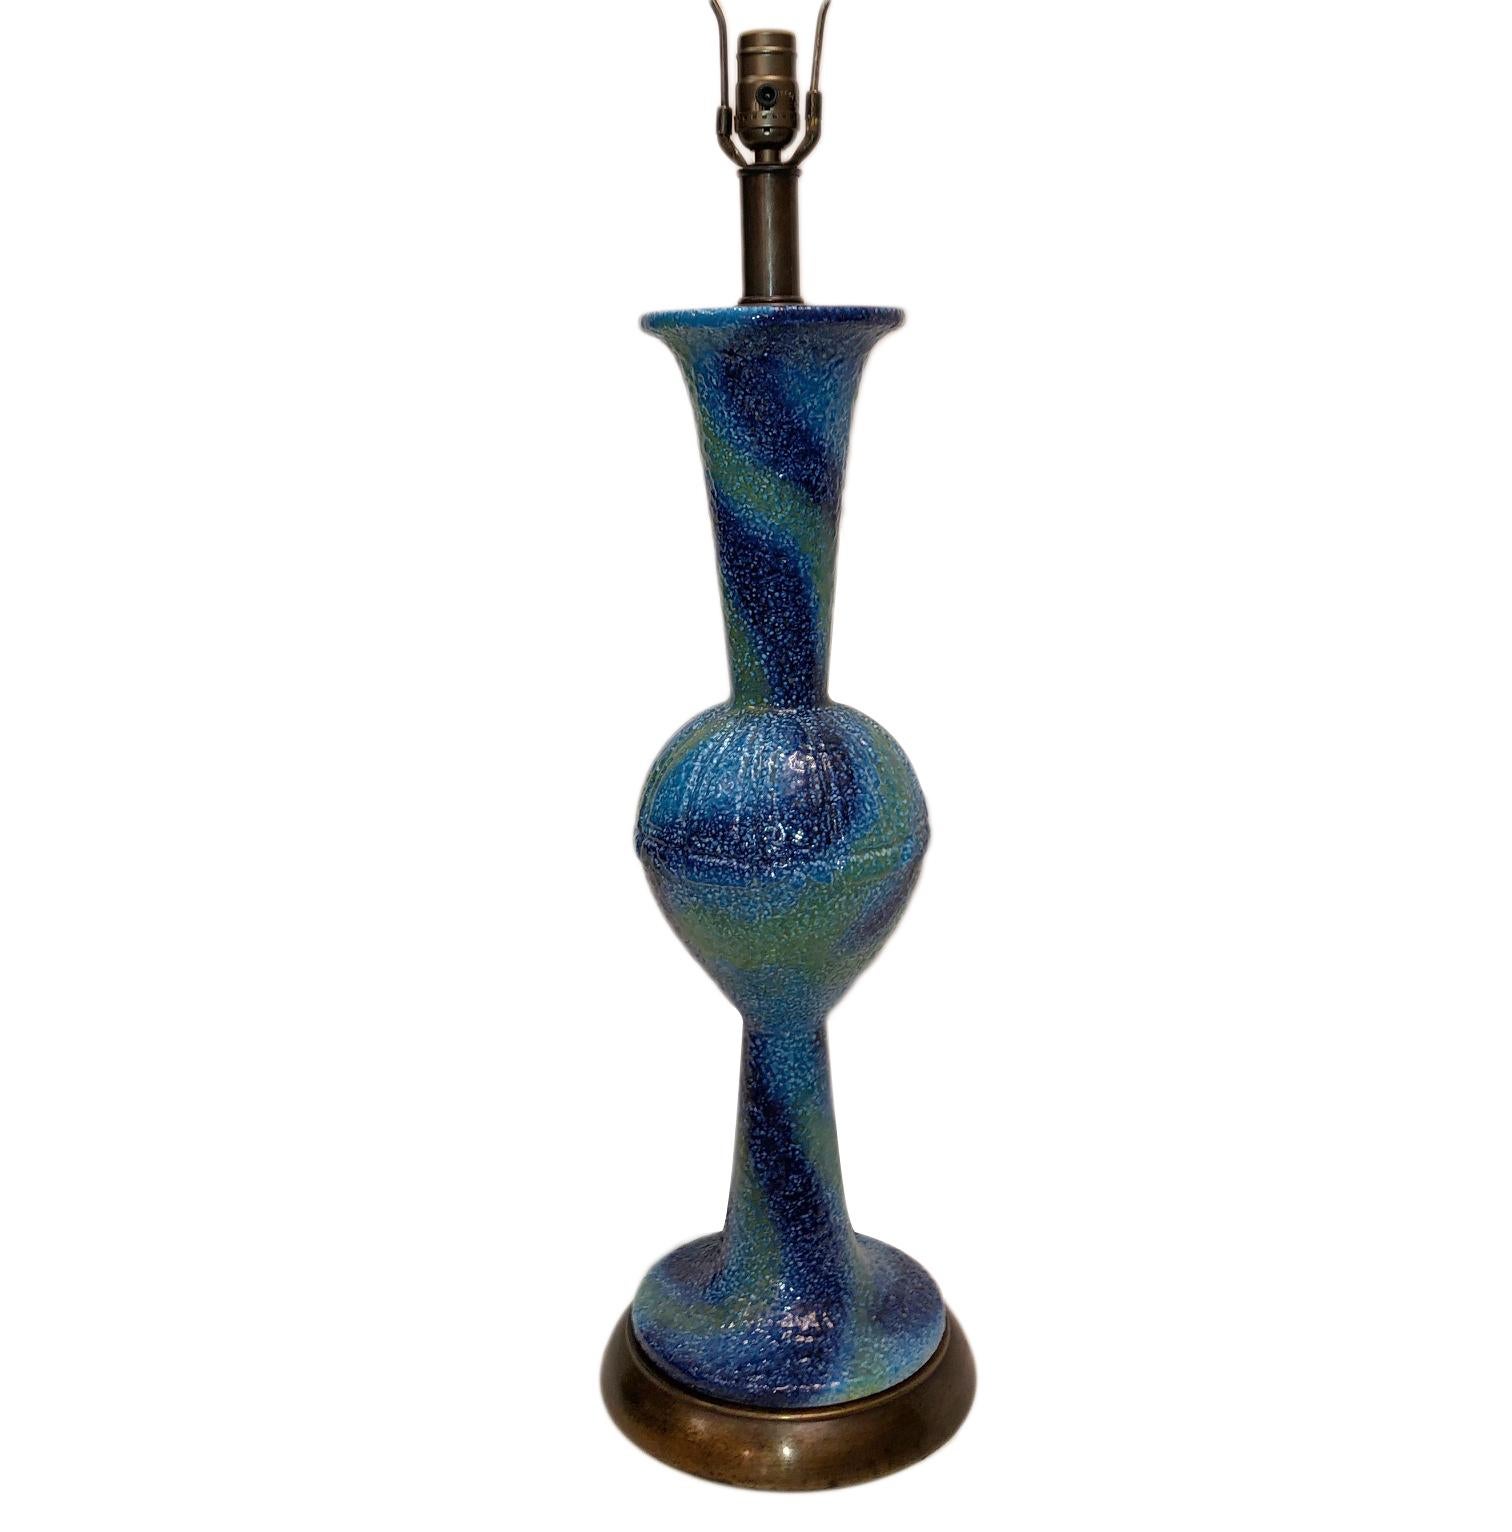 A single Italian circa 1960s porcelain table lamp with blue tones.

Measurements:
Height of body 24